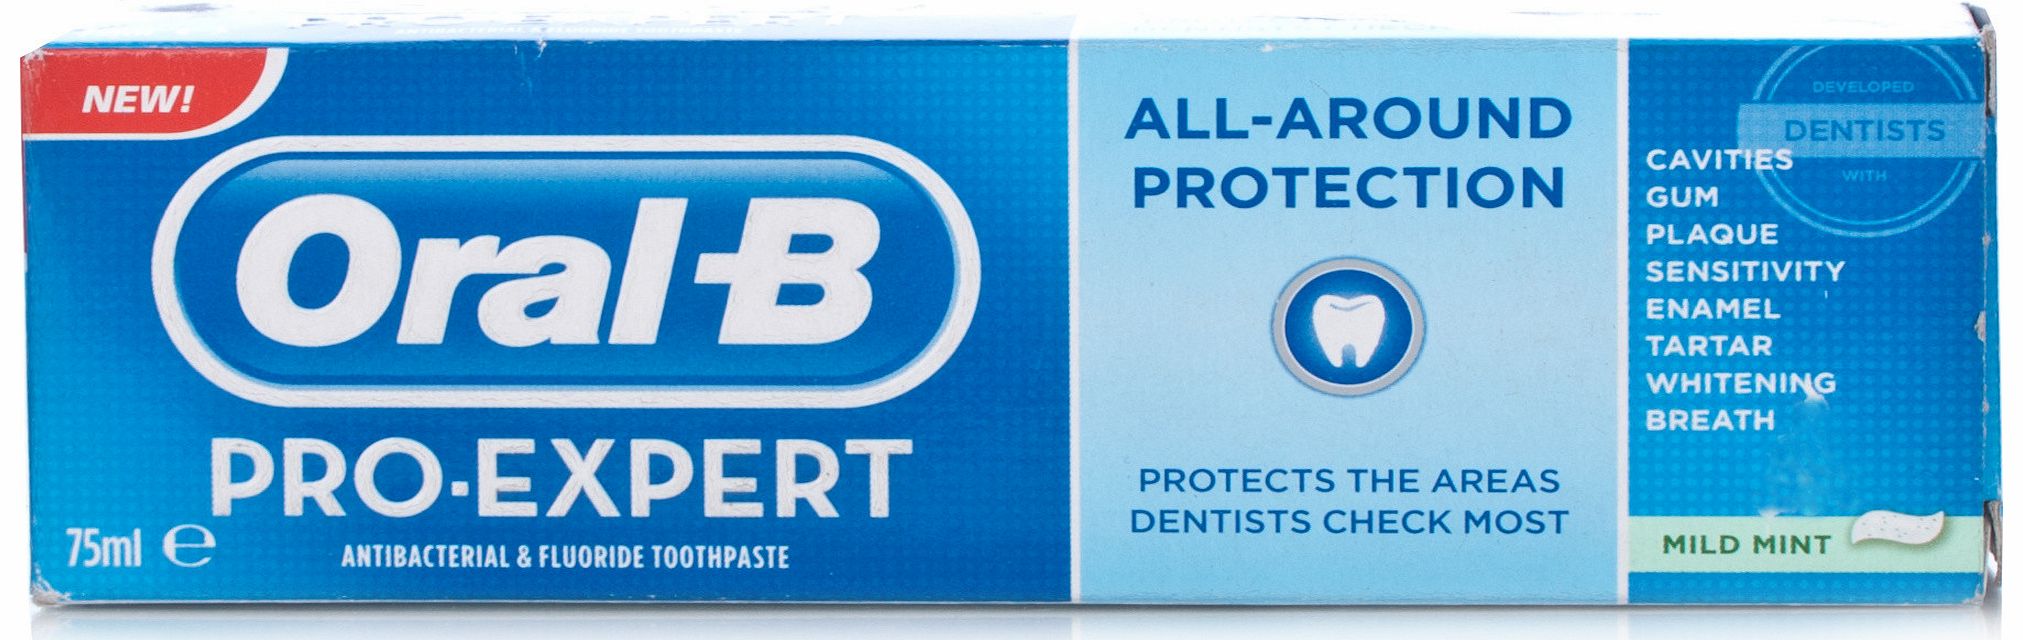 Oral-B Pro Expert All Around Protection Mild